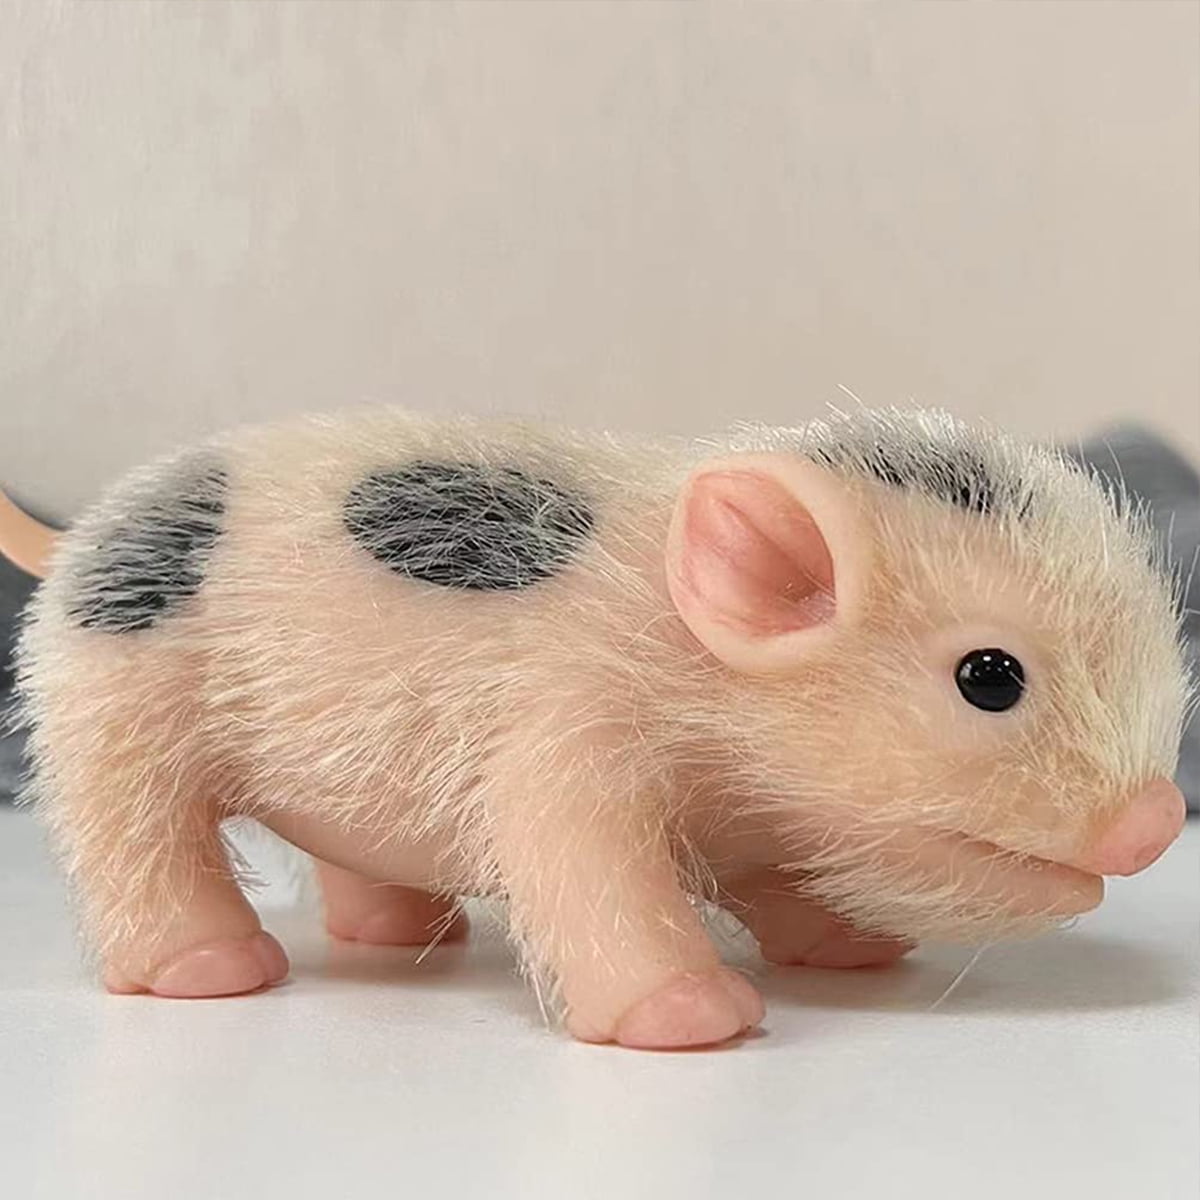 Linkkot Silicone Pet Pig 4 Inch Mini Realistic Silicone Piglet White  Hair,Stretchy Fake Animals Full Body Soft Silicone Pig,Lovely Silicone  Animals